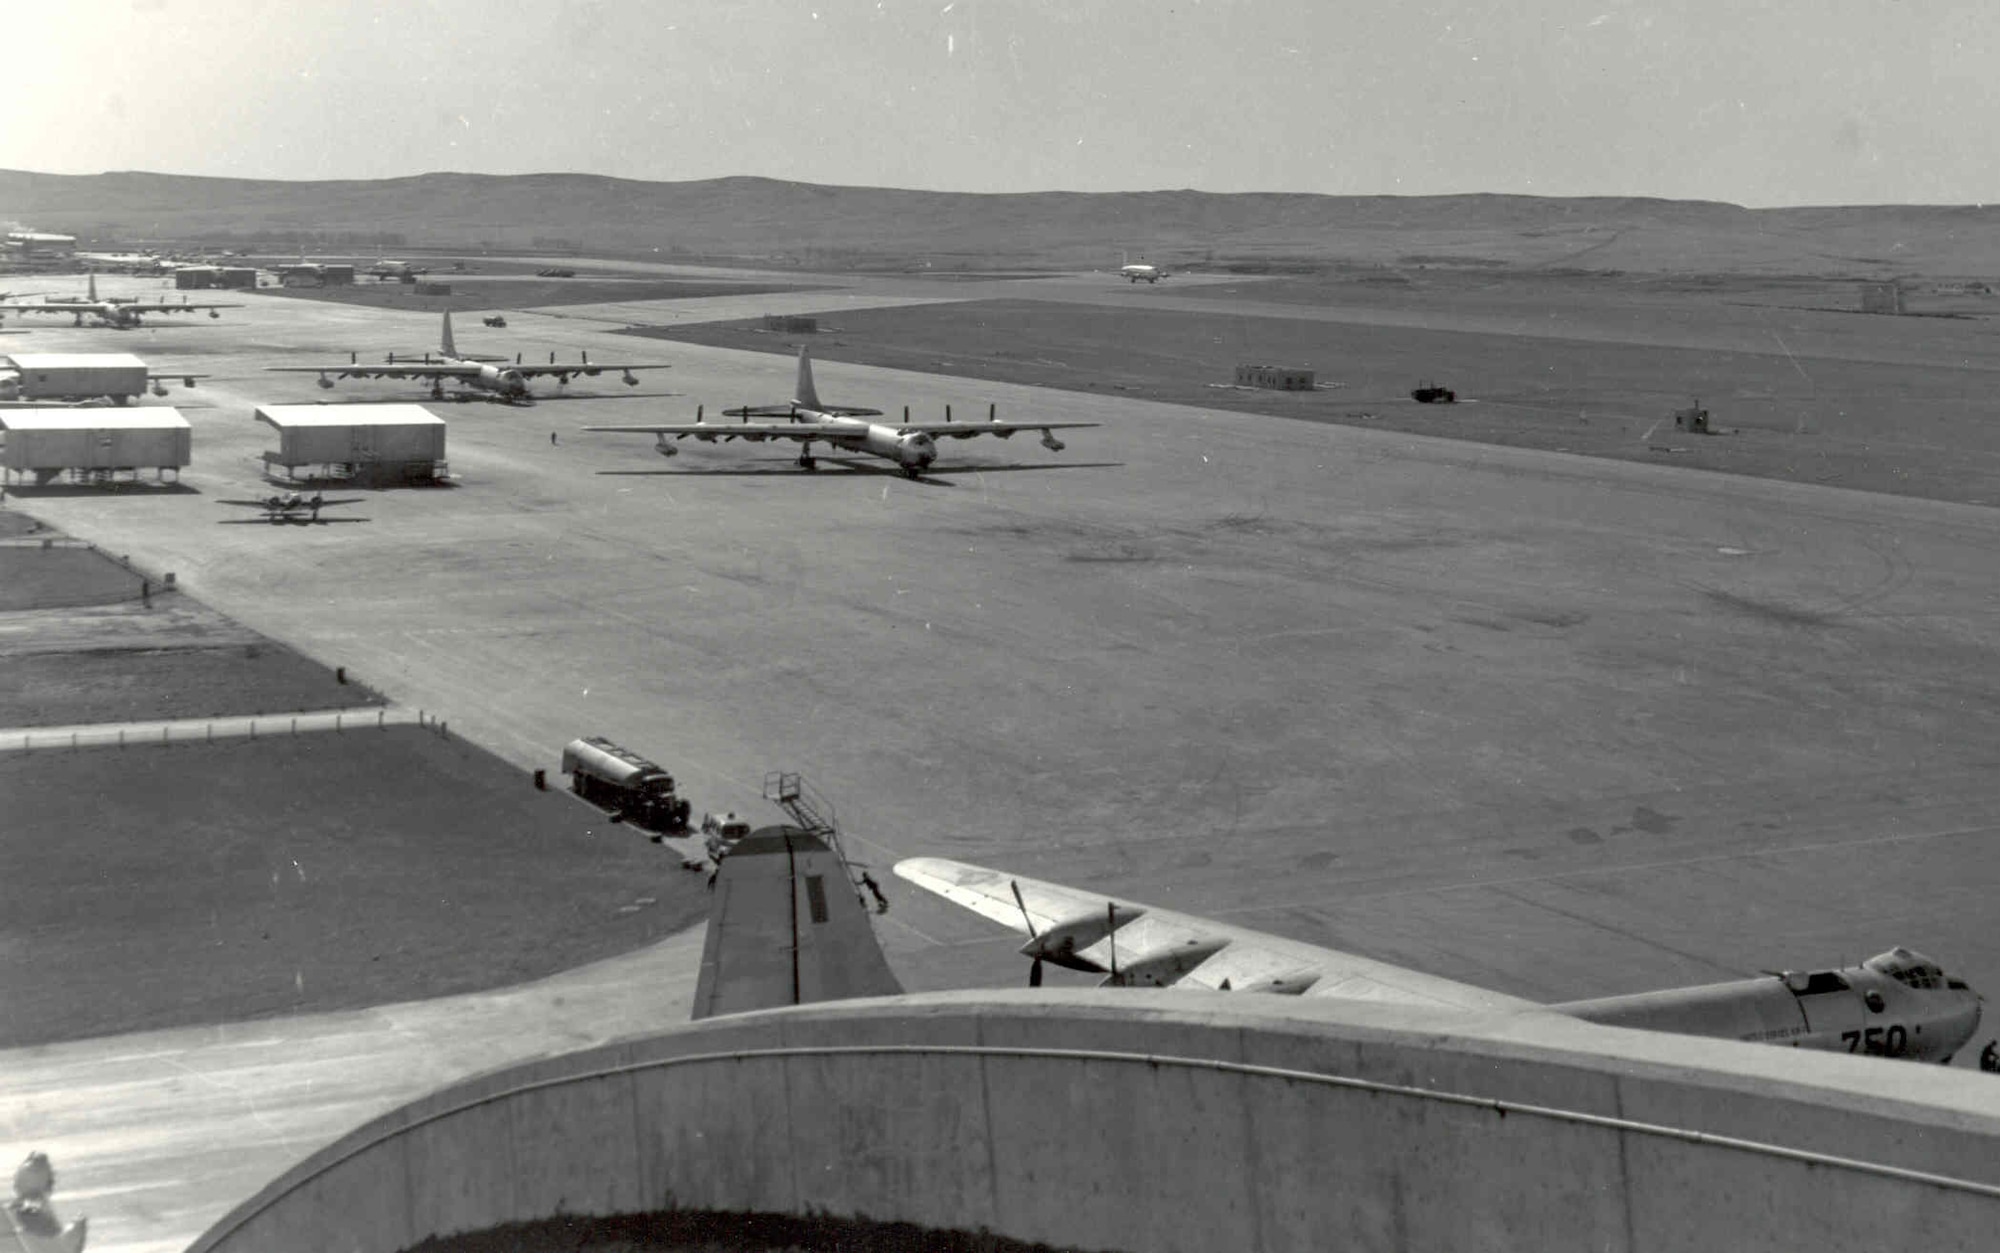 A group of RB-36s prepare to take off from the flightline on Ellsworth Air Force Base, S.D. The RB-36s unique arrangement of six piston-driven engines and four jet engines prompted the phrase "six turnin and four burnin." Though powerful, these engines were incredibly complex, and required a tremendous amount of maintenance to keep them running. (U.S. Air Force courtesy photo)